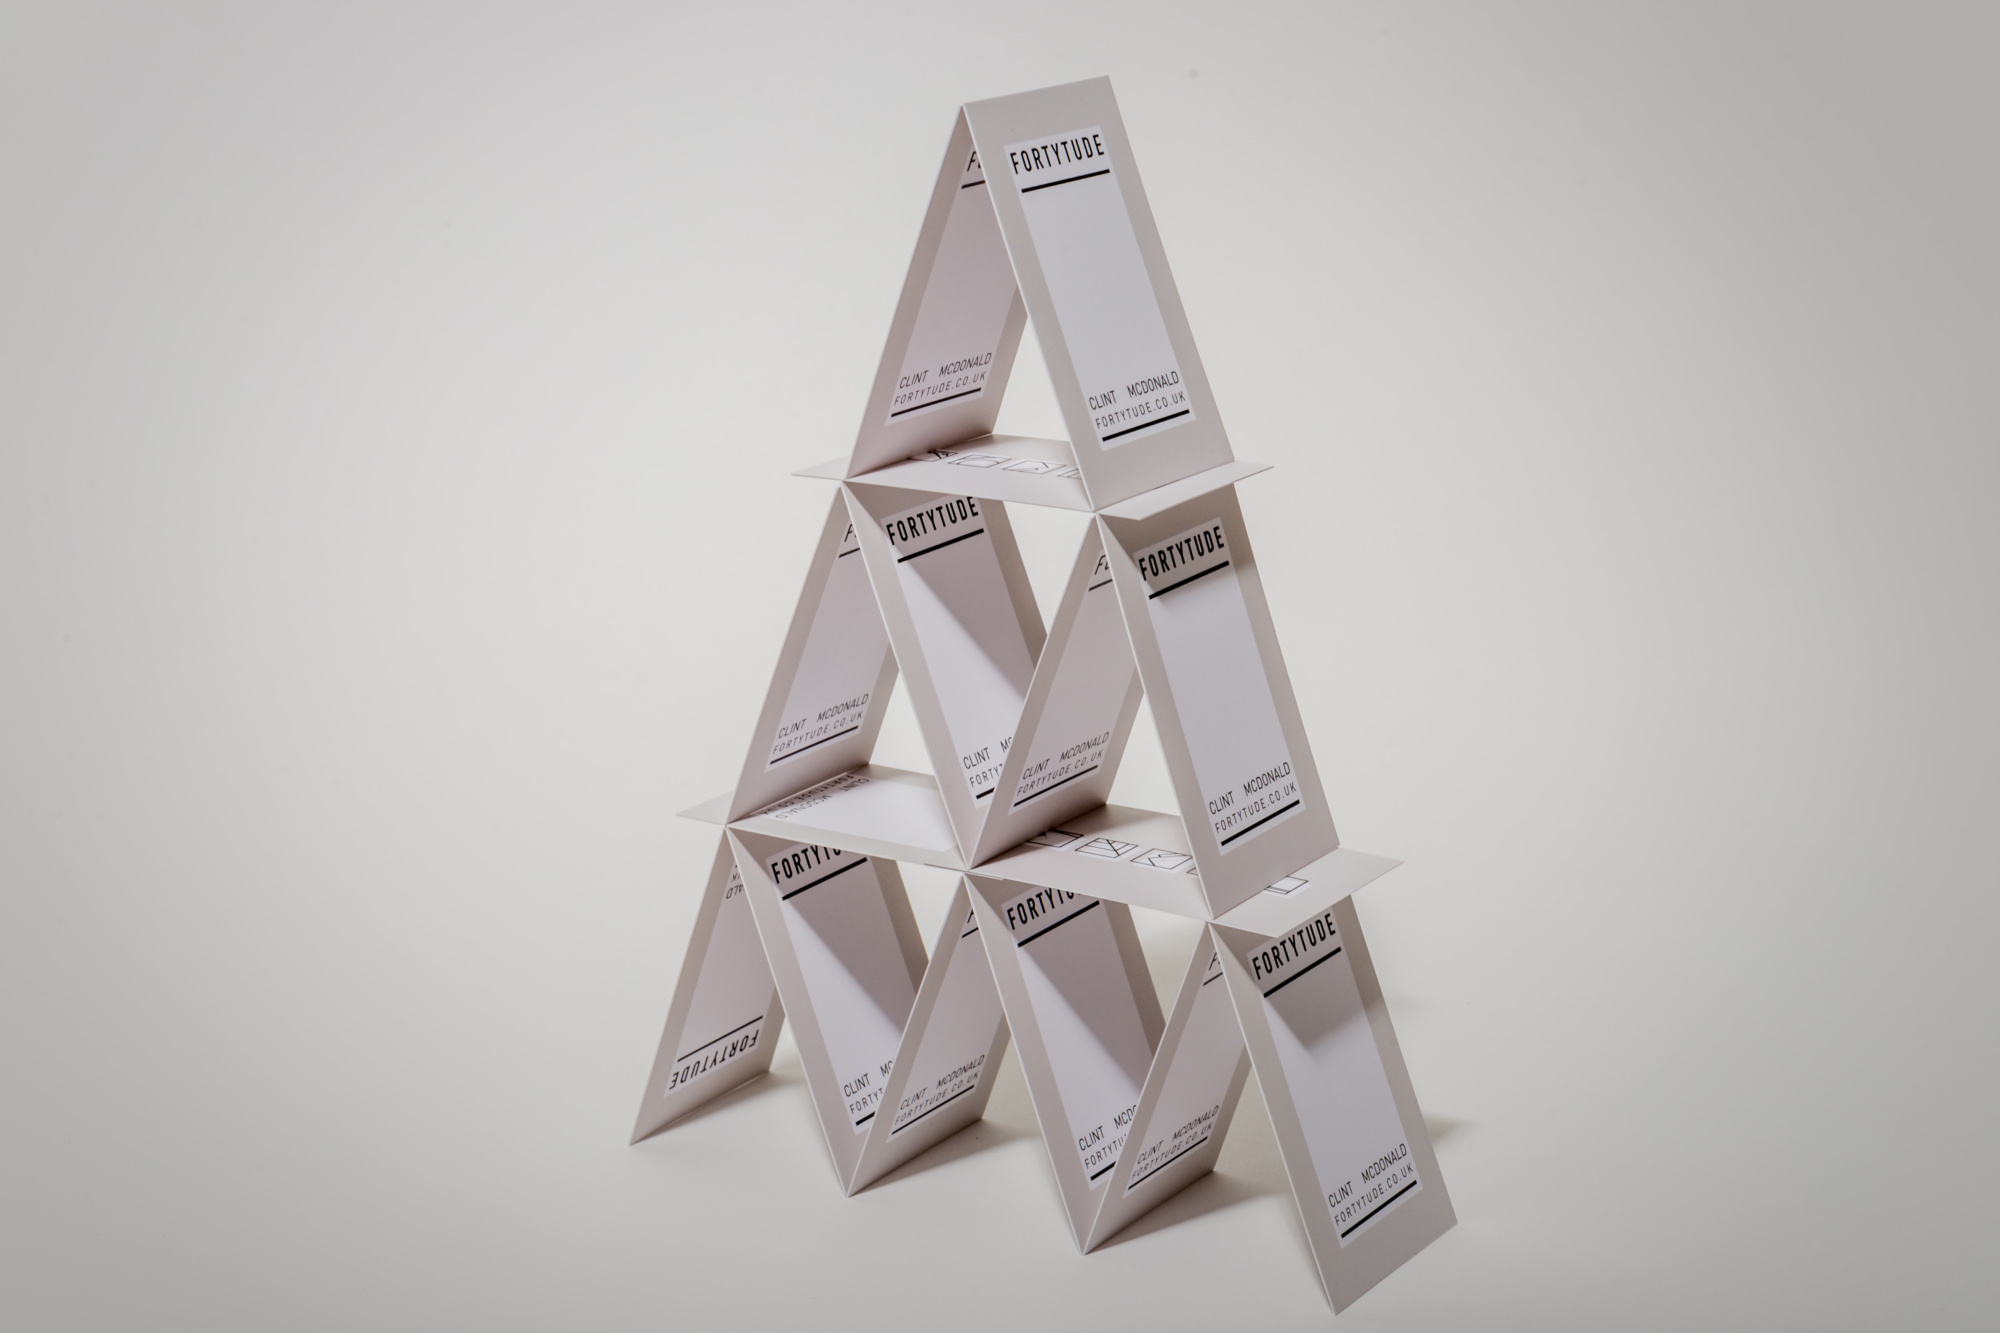 A tower made out of business cards for Fortytude- slight silhouette behind. Graphic design produced by Barefaced Studios, design agency based in Islington, North London.